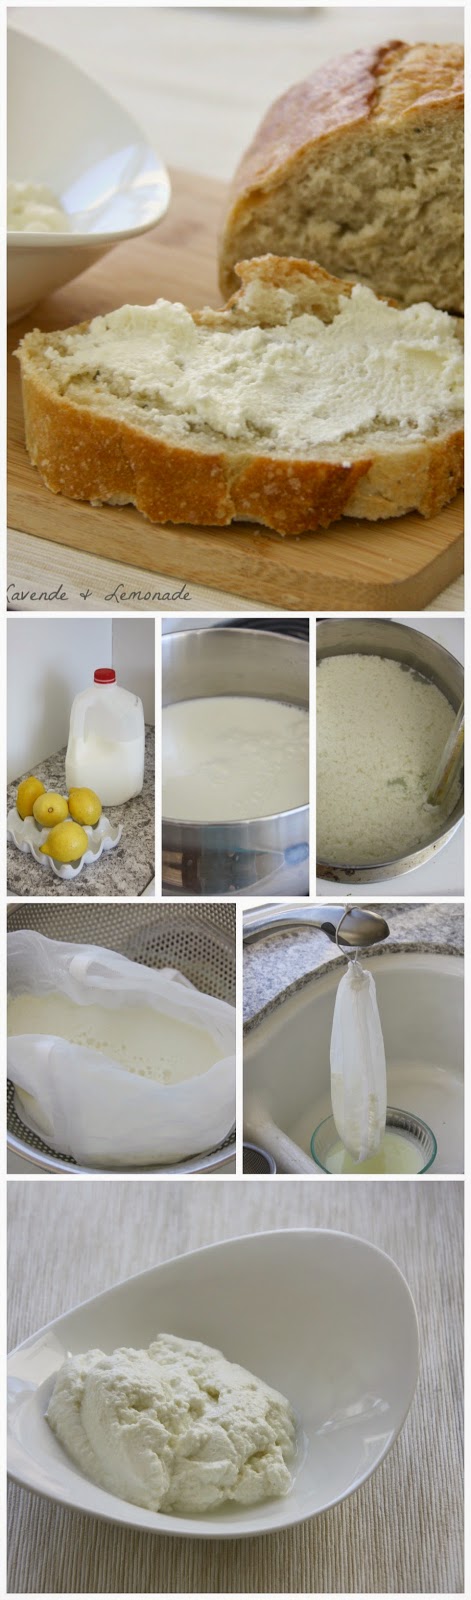 Homemade Ricotta - amazingly delicious and so easy to make with these step-by-step instructions by Lavende & Lemonade